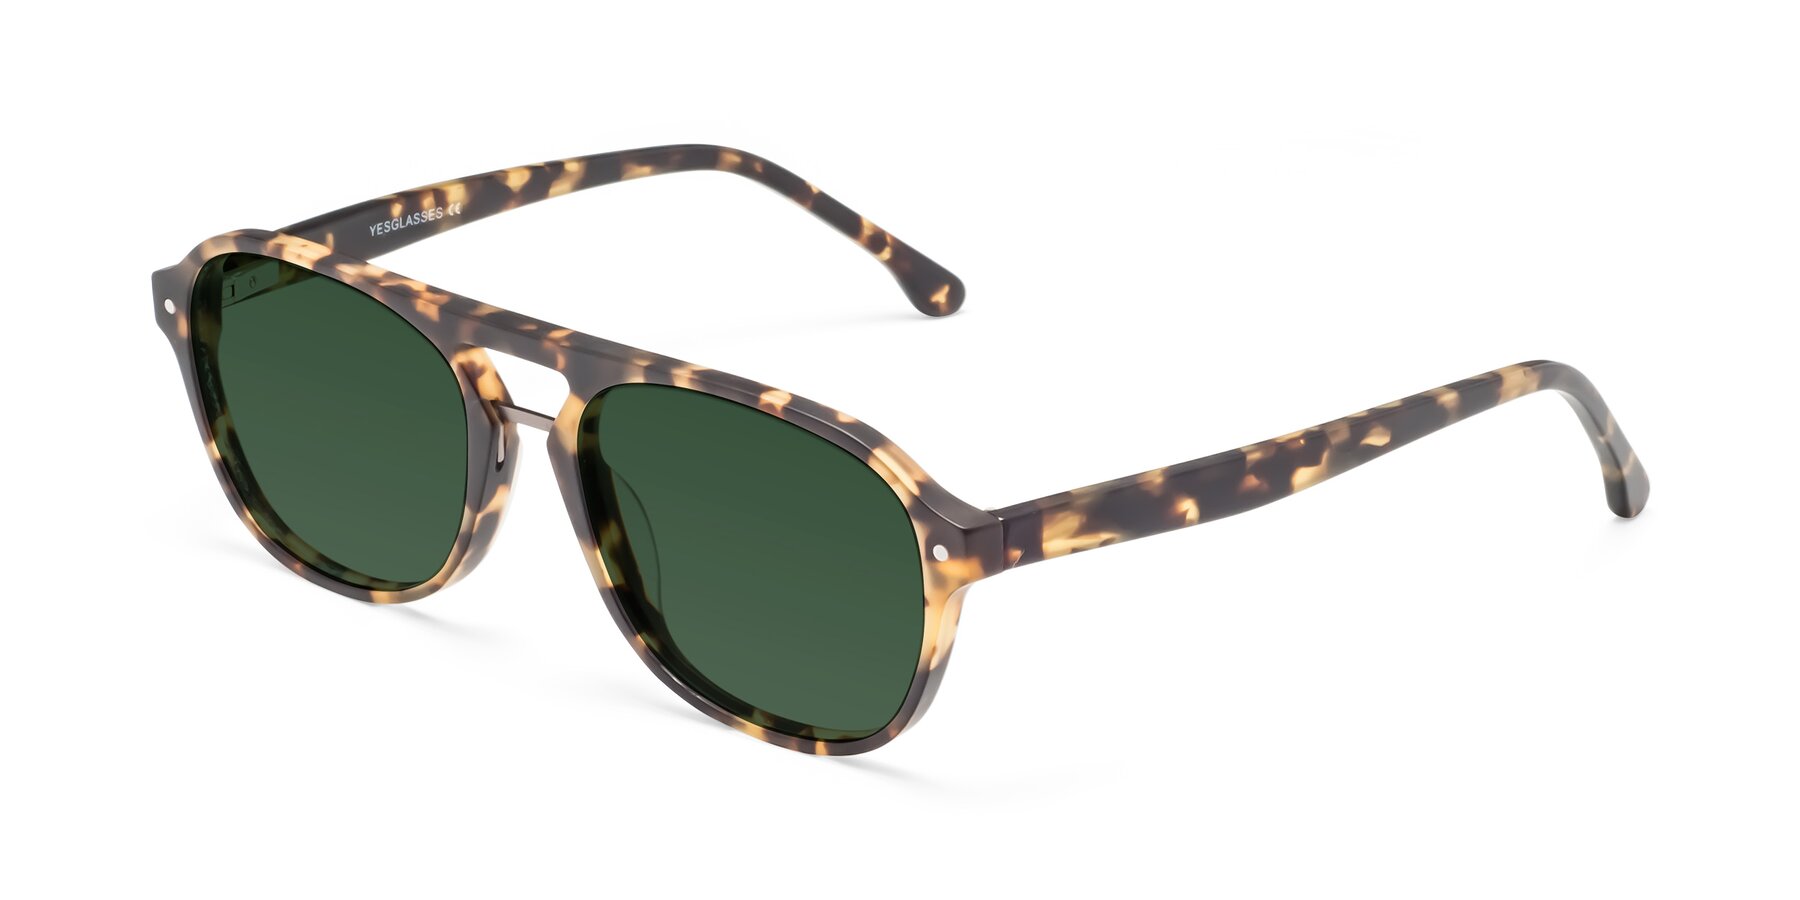 Angle of 17416 in Matte Tortoise with Green Tinted Lenses